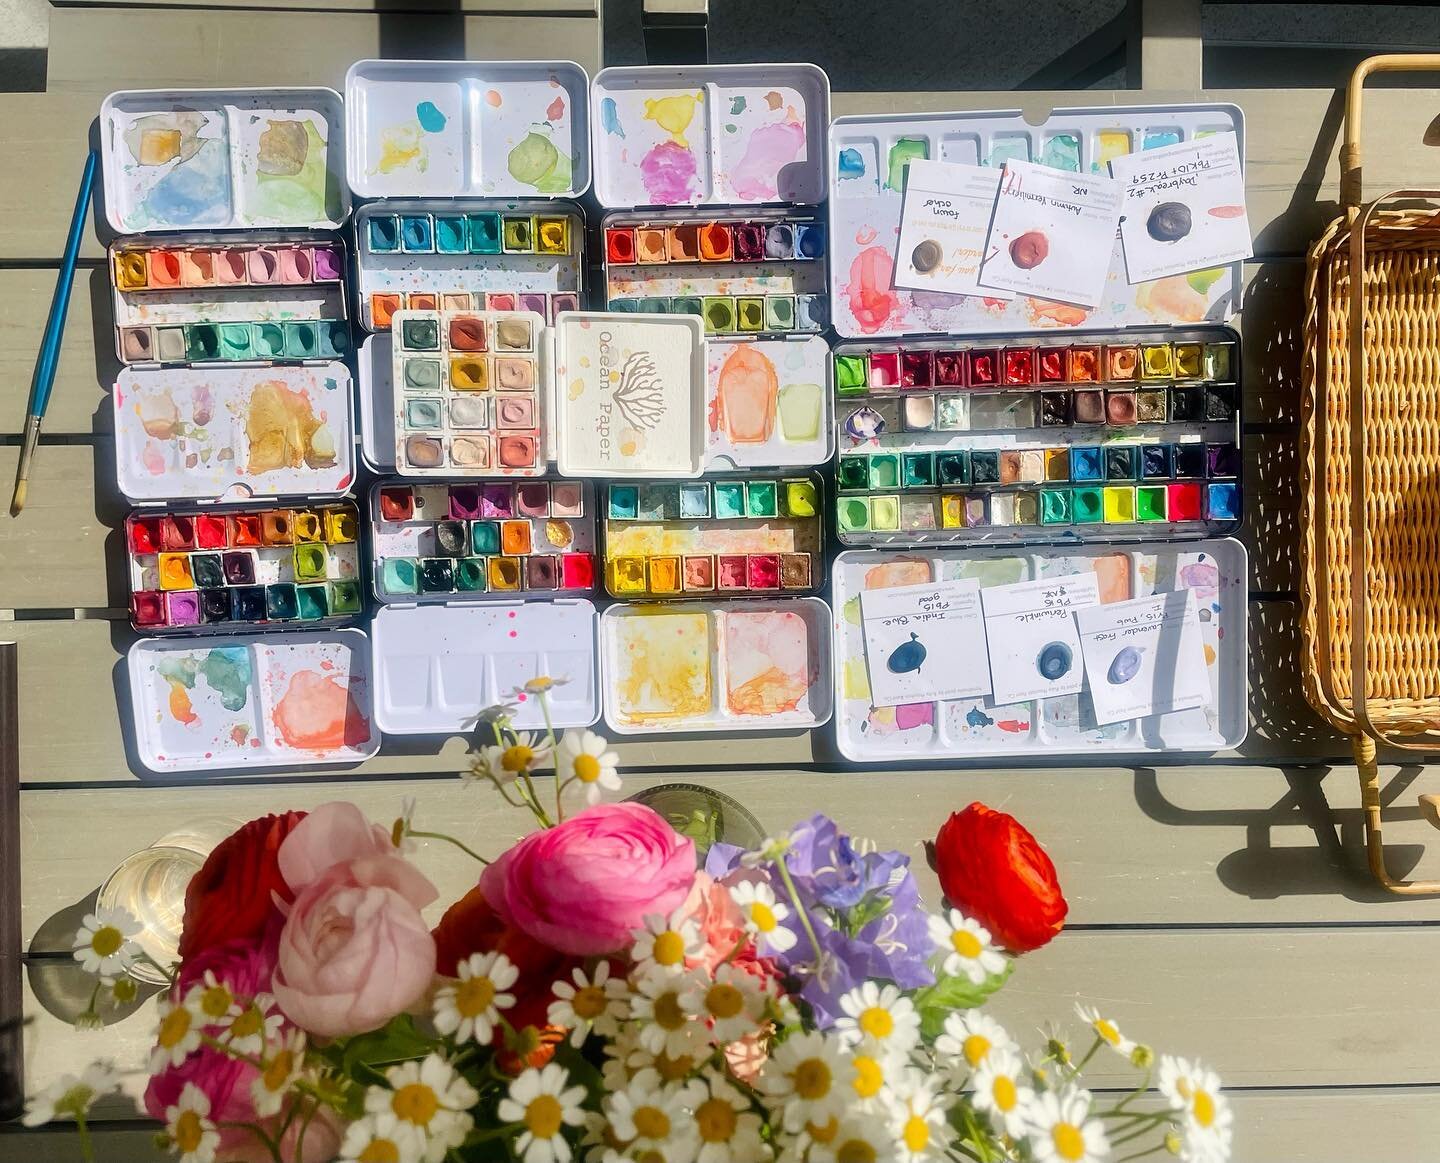 I got out ALL my watercolor paints today so that I could create a new pallet based on this floral arrangement. I was loving the pinks + bright oranges, mixed with yellow + lavender. I just had to have a paint set that mimicked these colors.